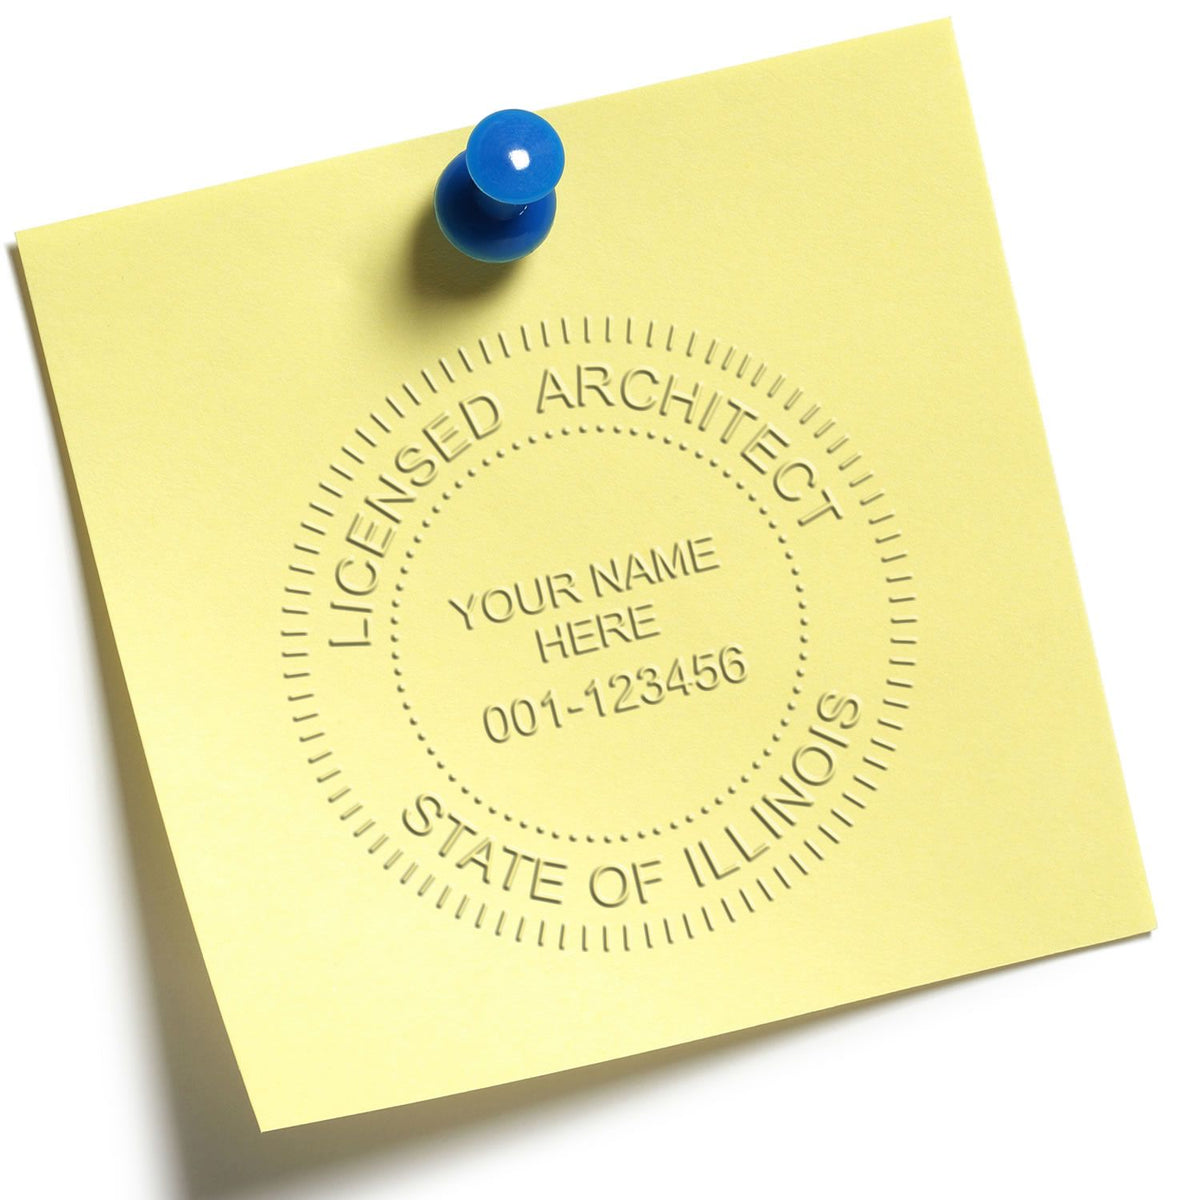 This paper is stamped with a sample imprint of the Handheld Illinois Architect Seal Embosser, signifying its quality and reliability.